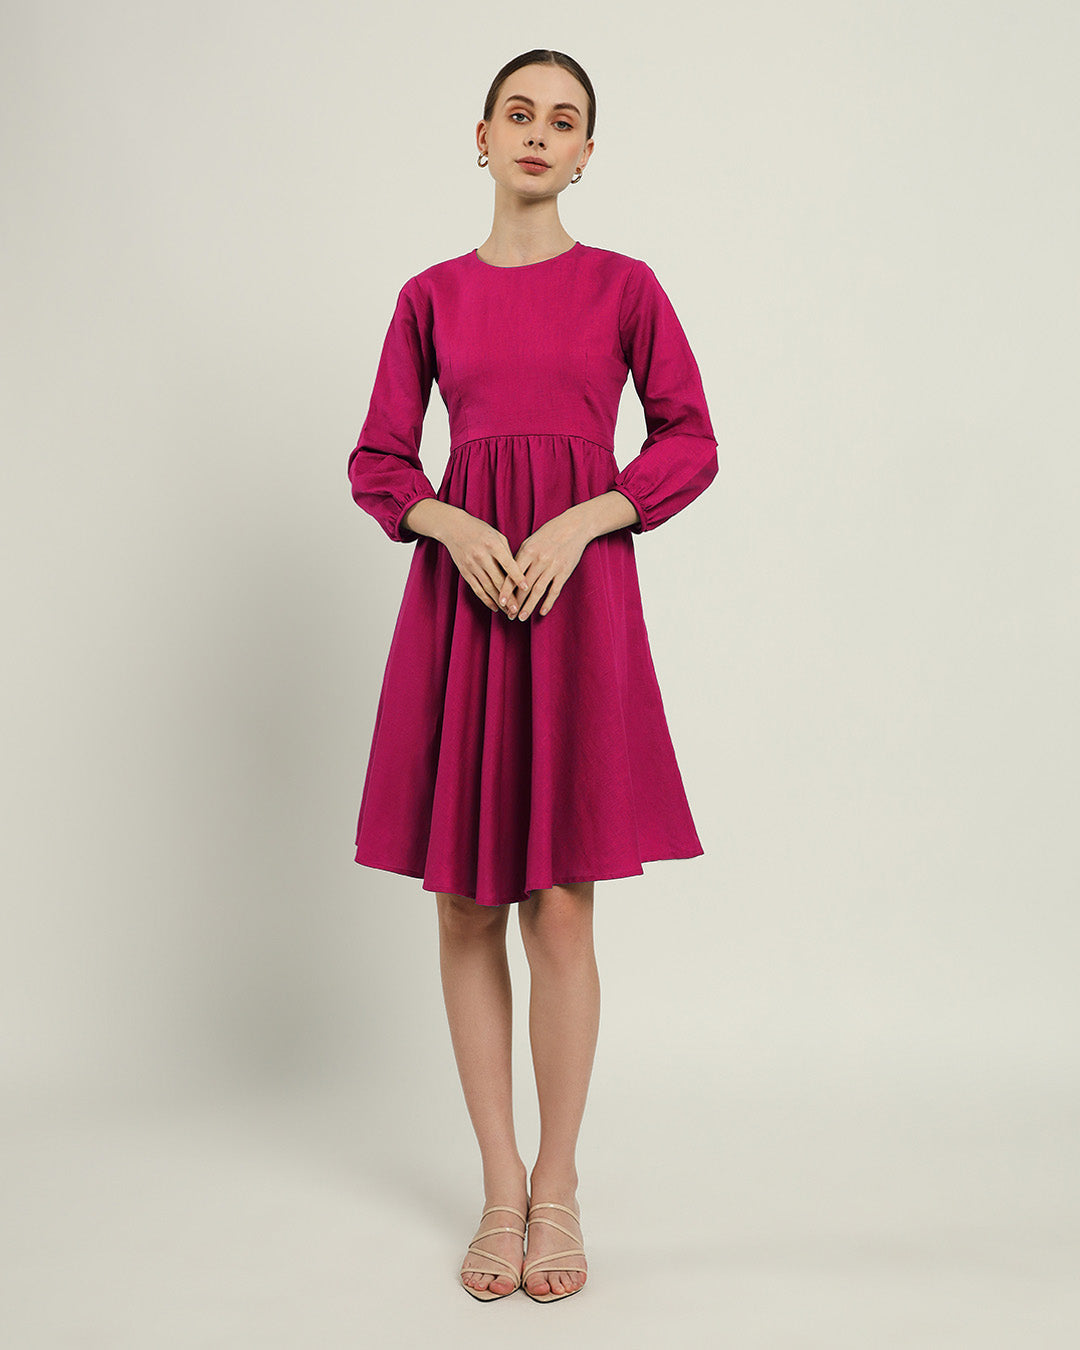 The Exeter Berry Cotton Dress